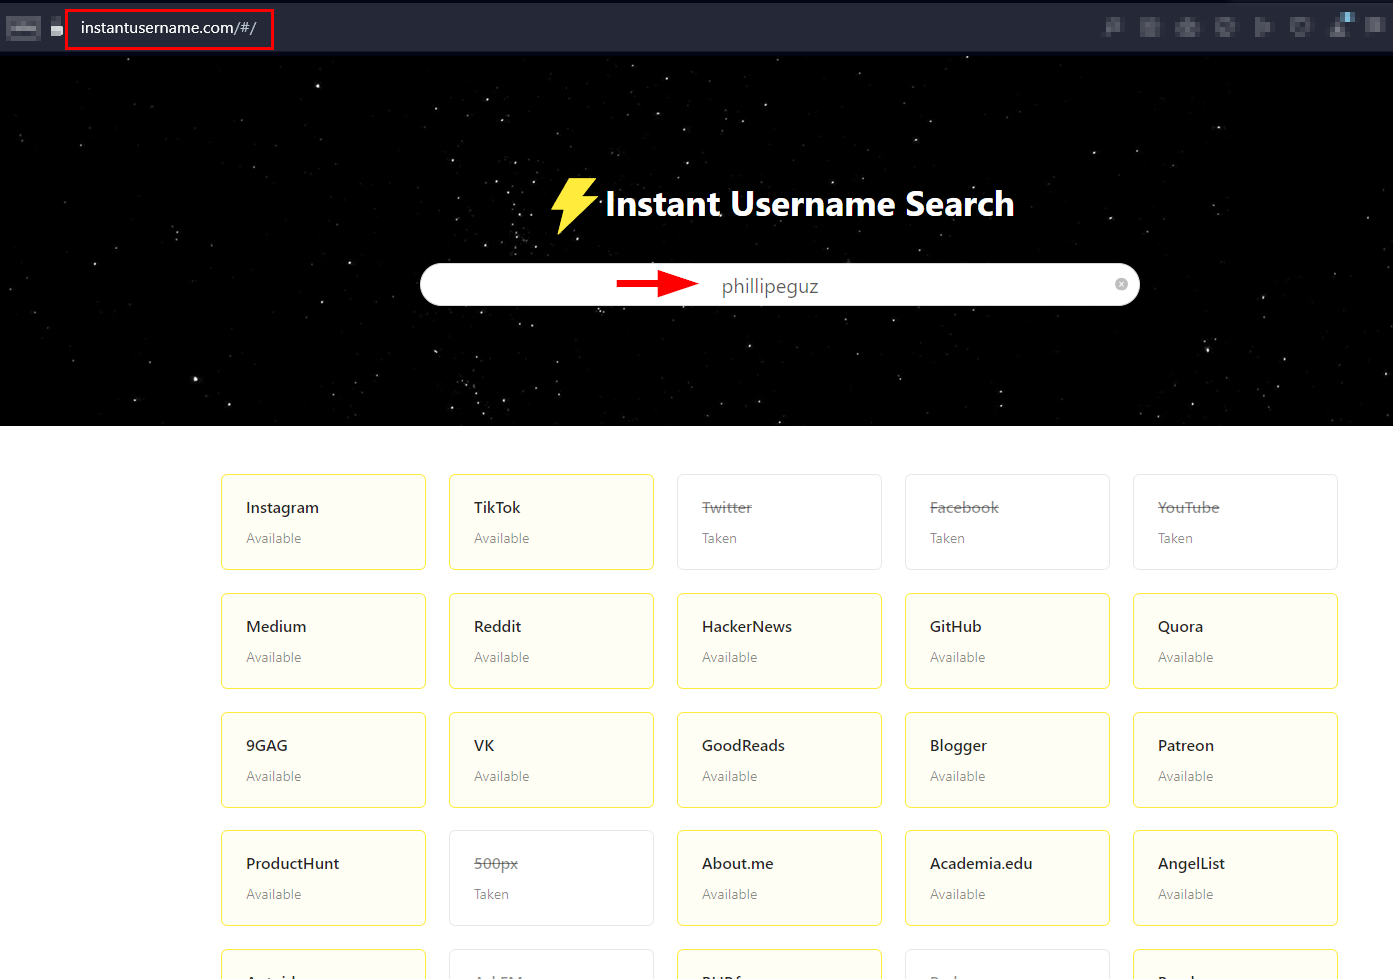 searching in the Instant Username Search